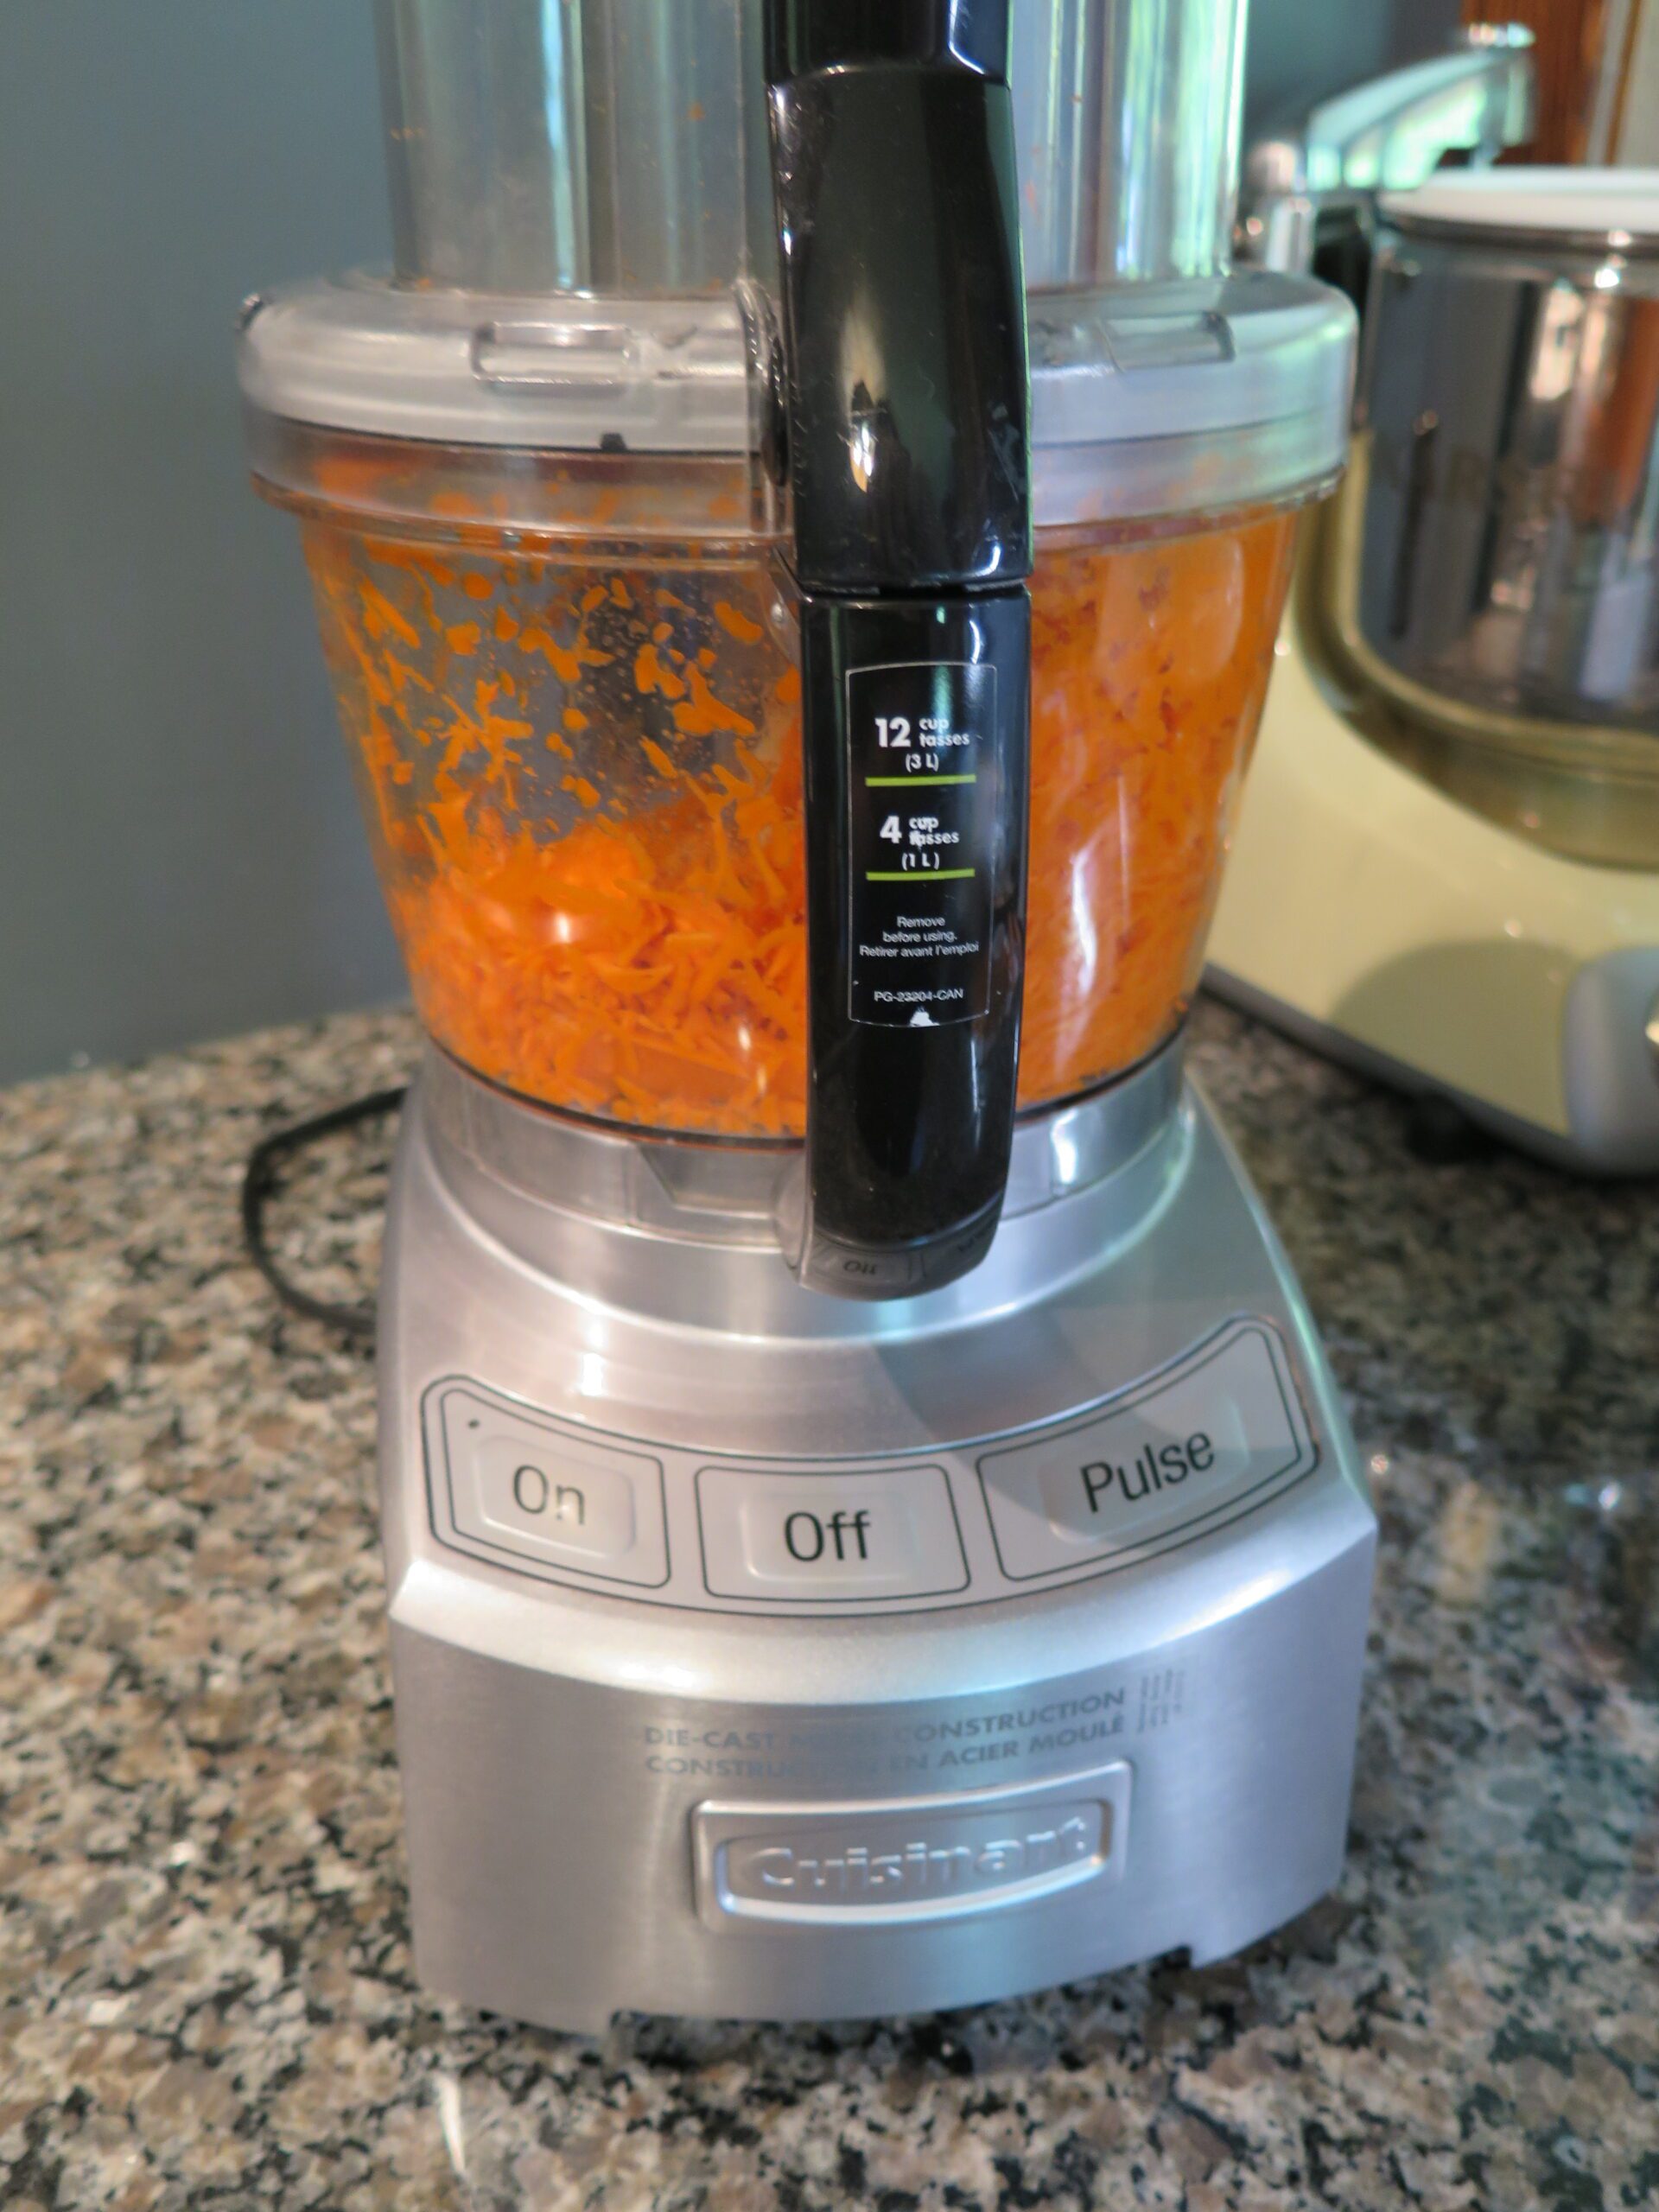 Carrots grated in a Cuisinart Food Processor